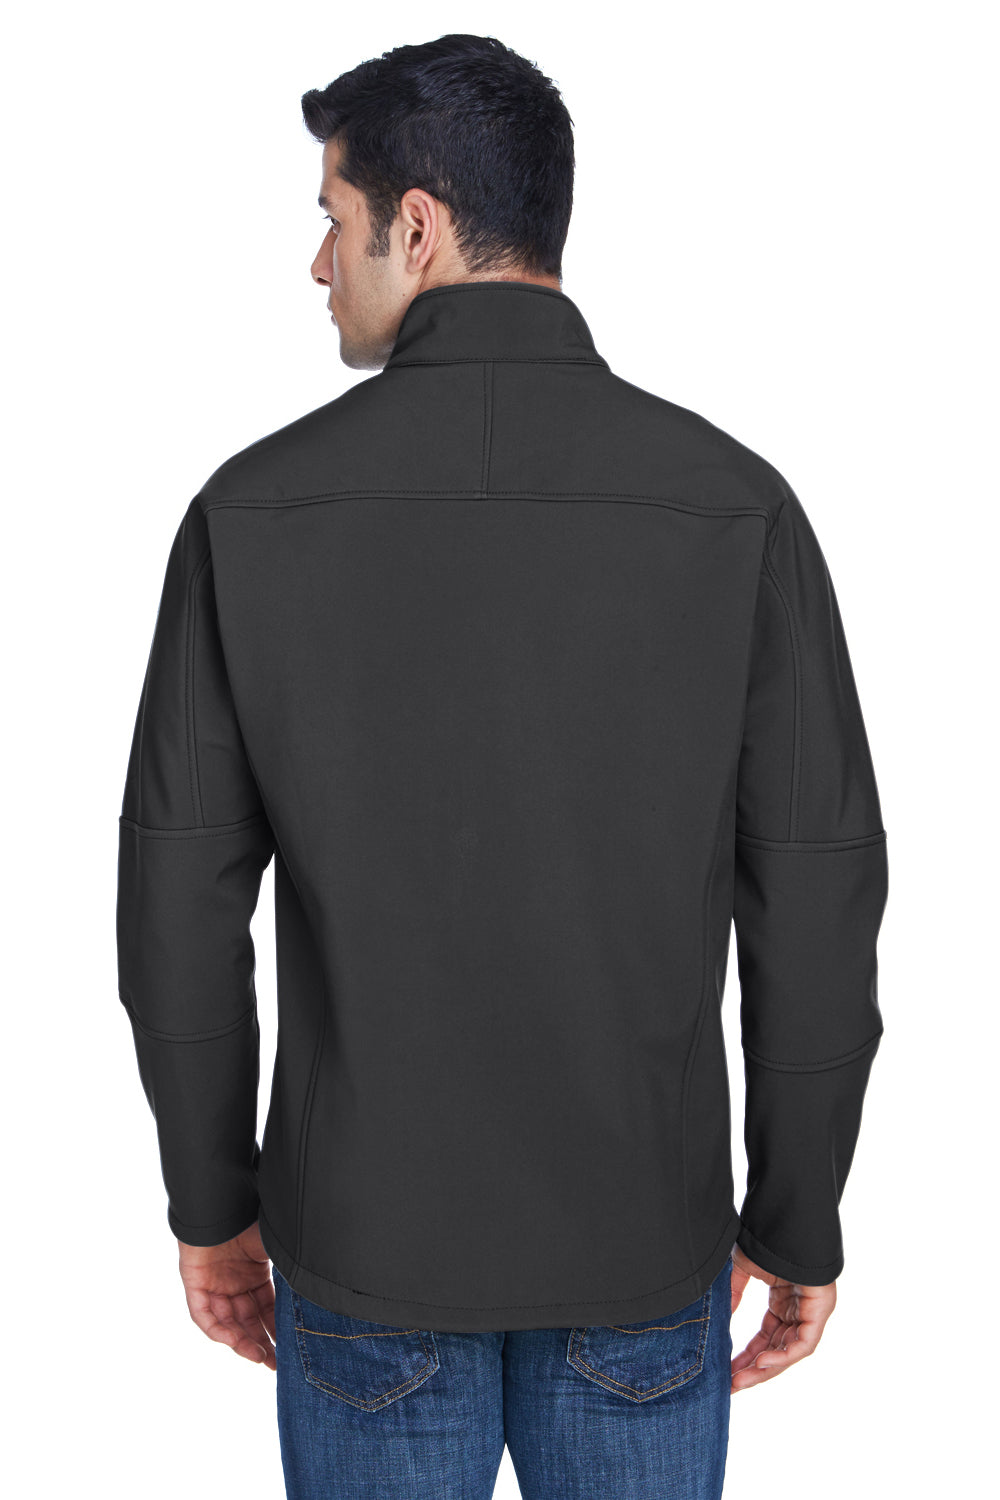 North End 88138 Mens Technical Water Resistant Full Zip Jacket Graphite Grey Back